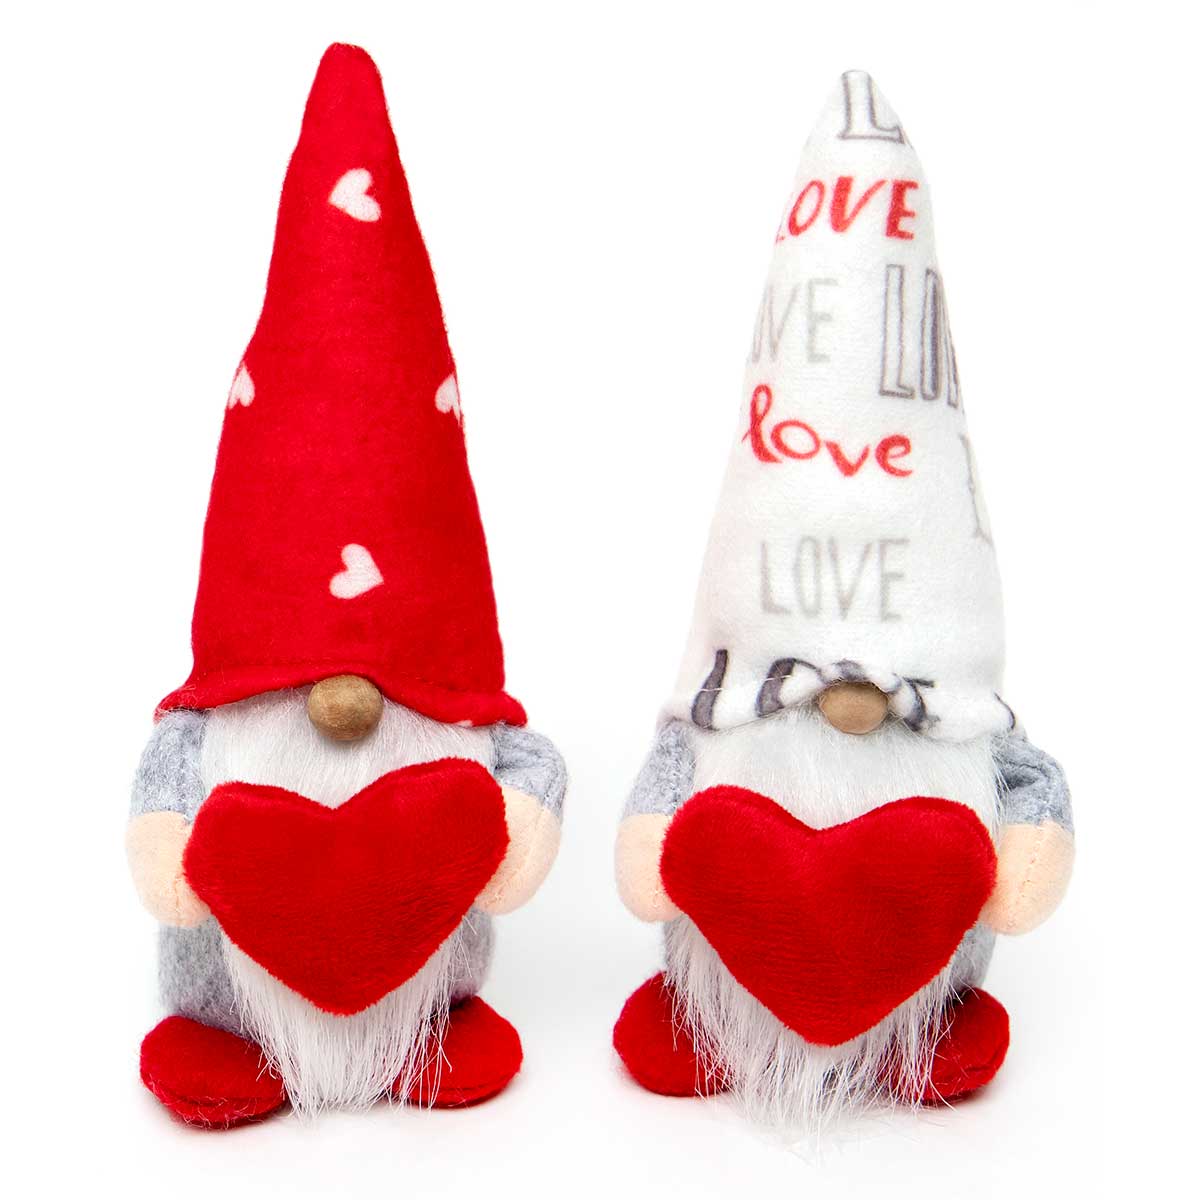 b50 Luv Gnome with Big Heart, Wood Nose 6"